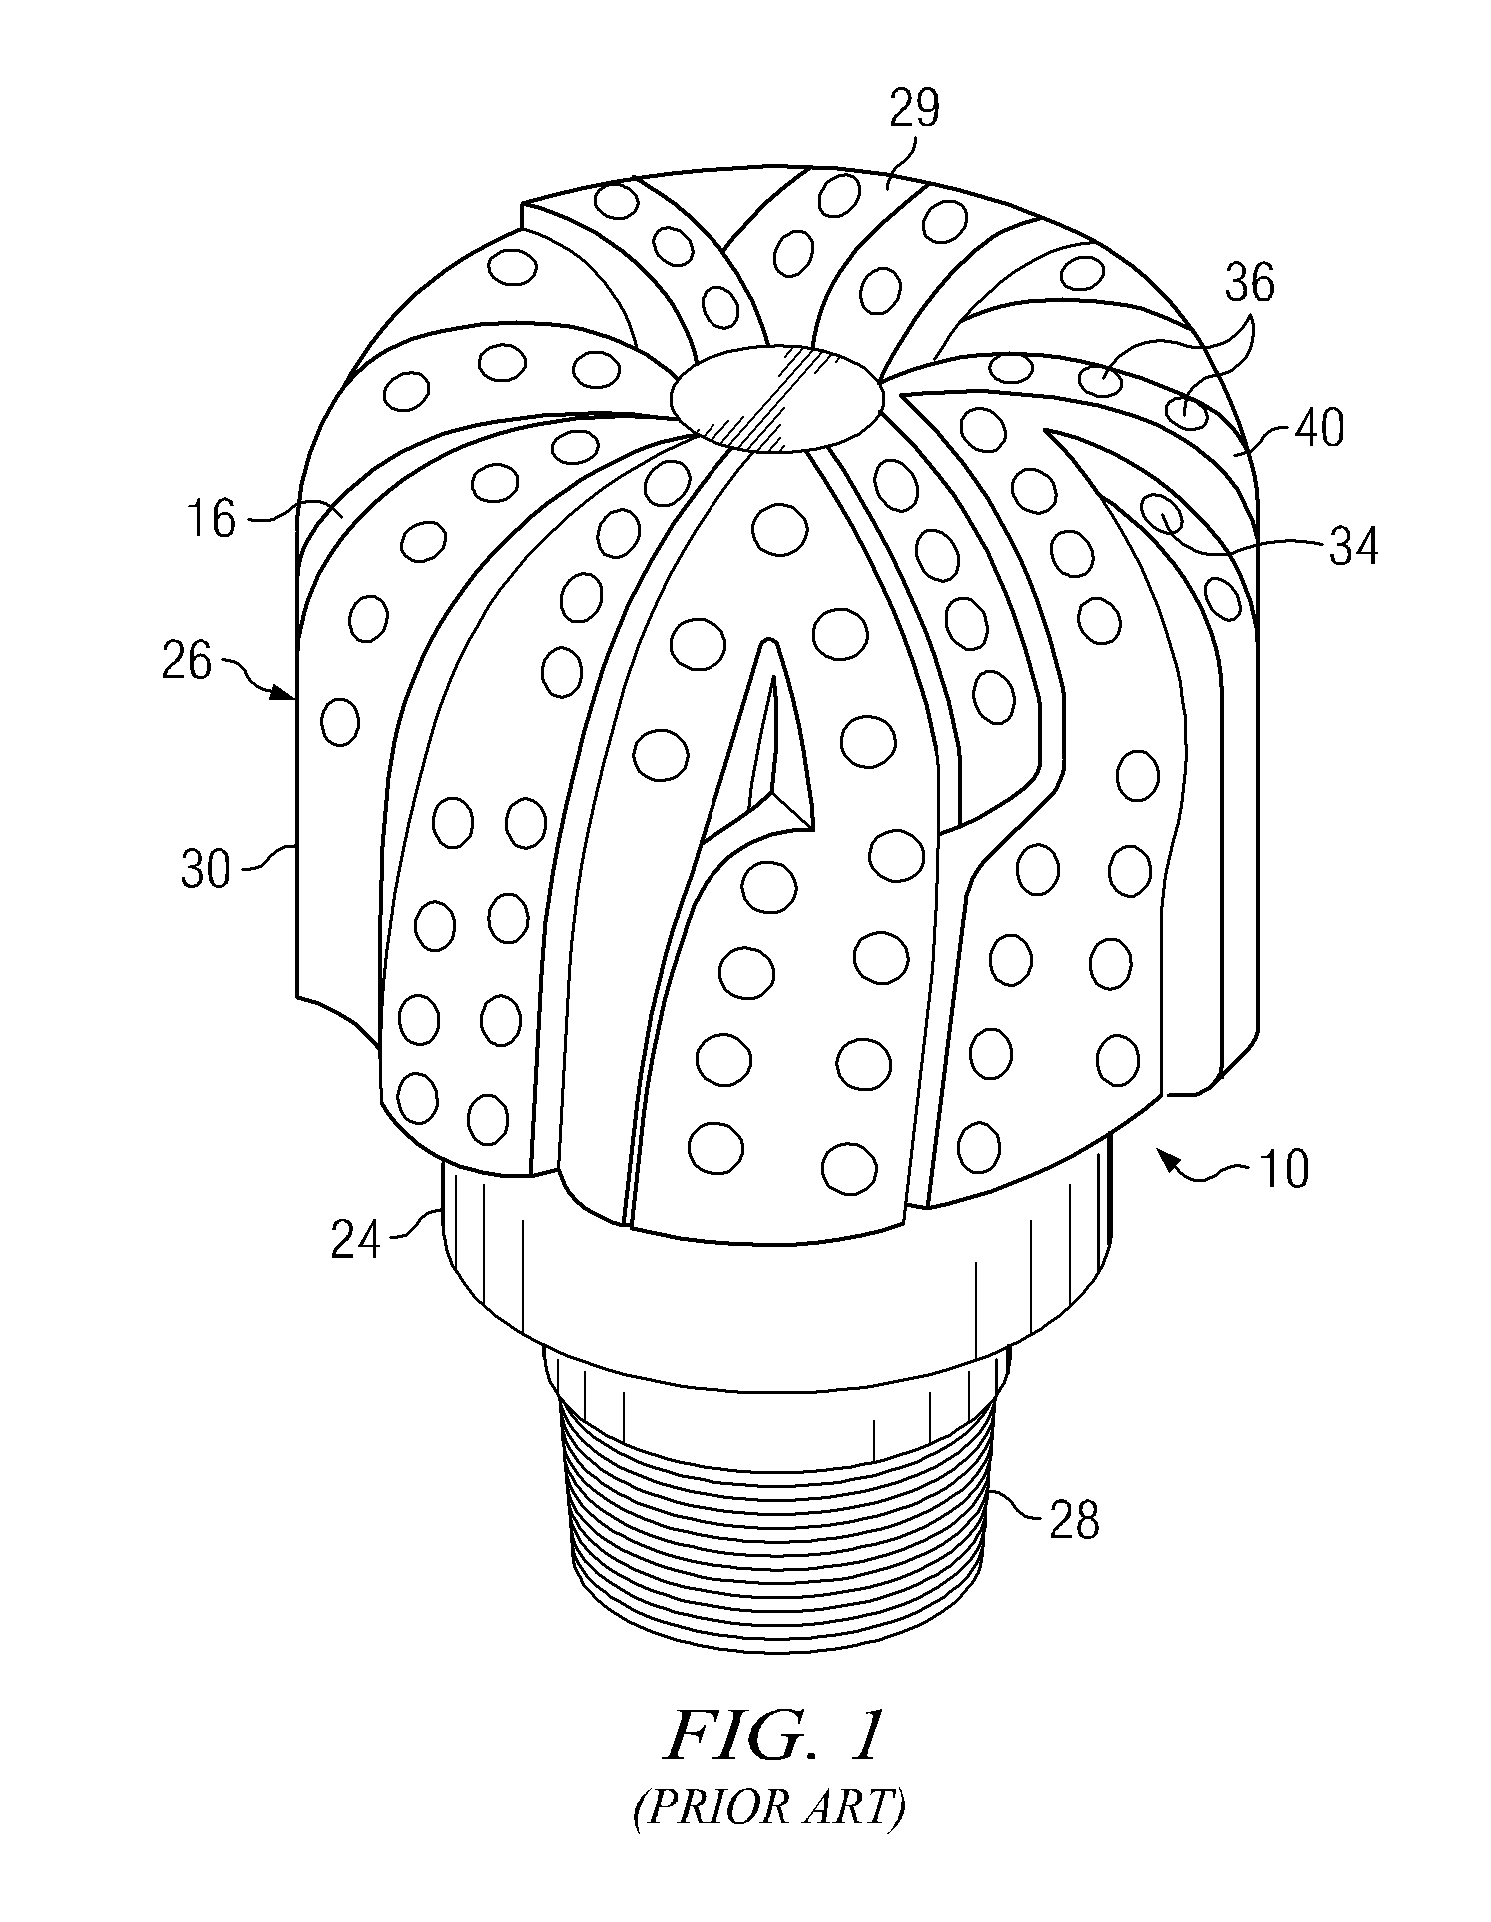 Drill bits and methods of manufacturing such drill bits